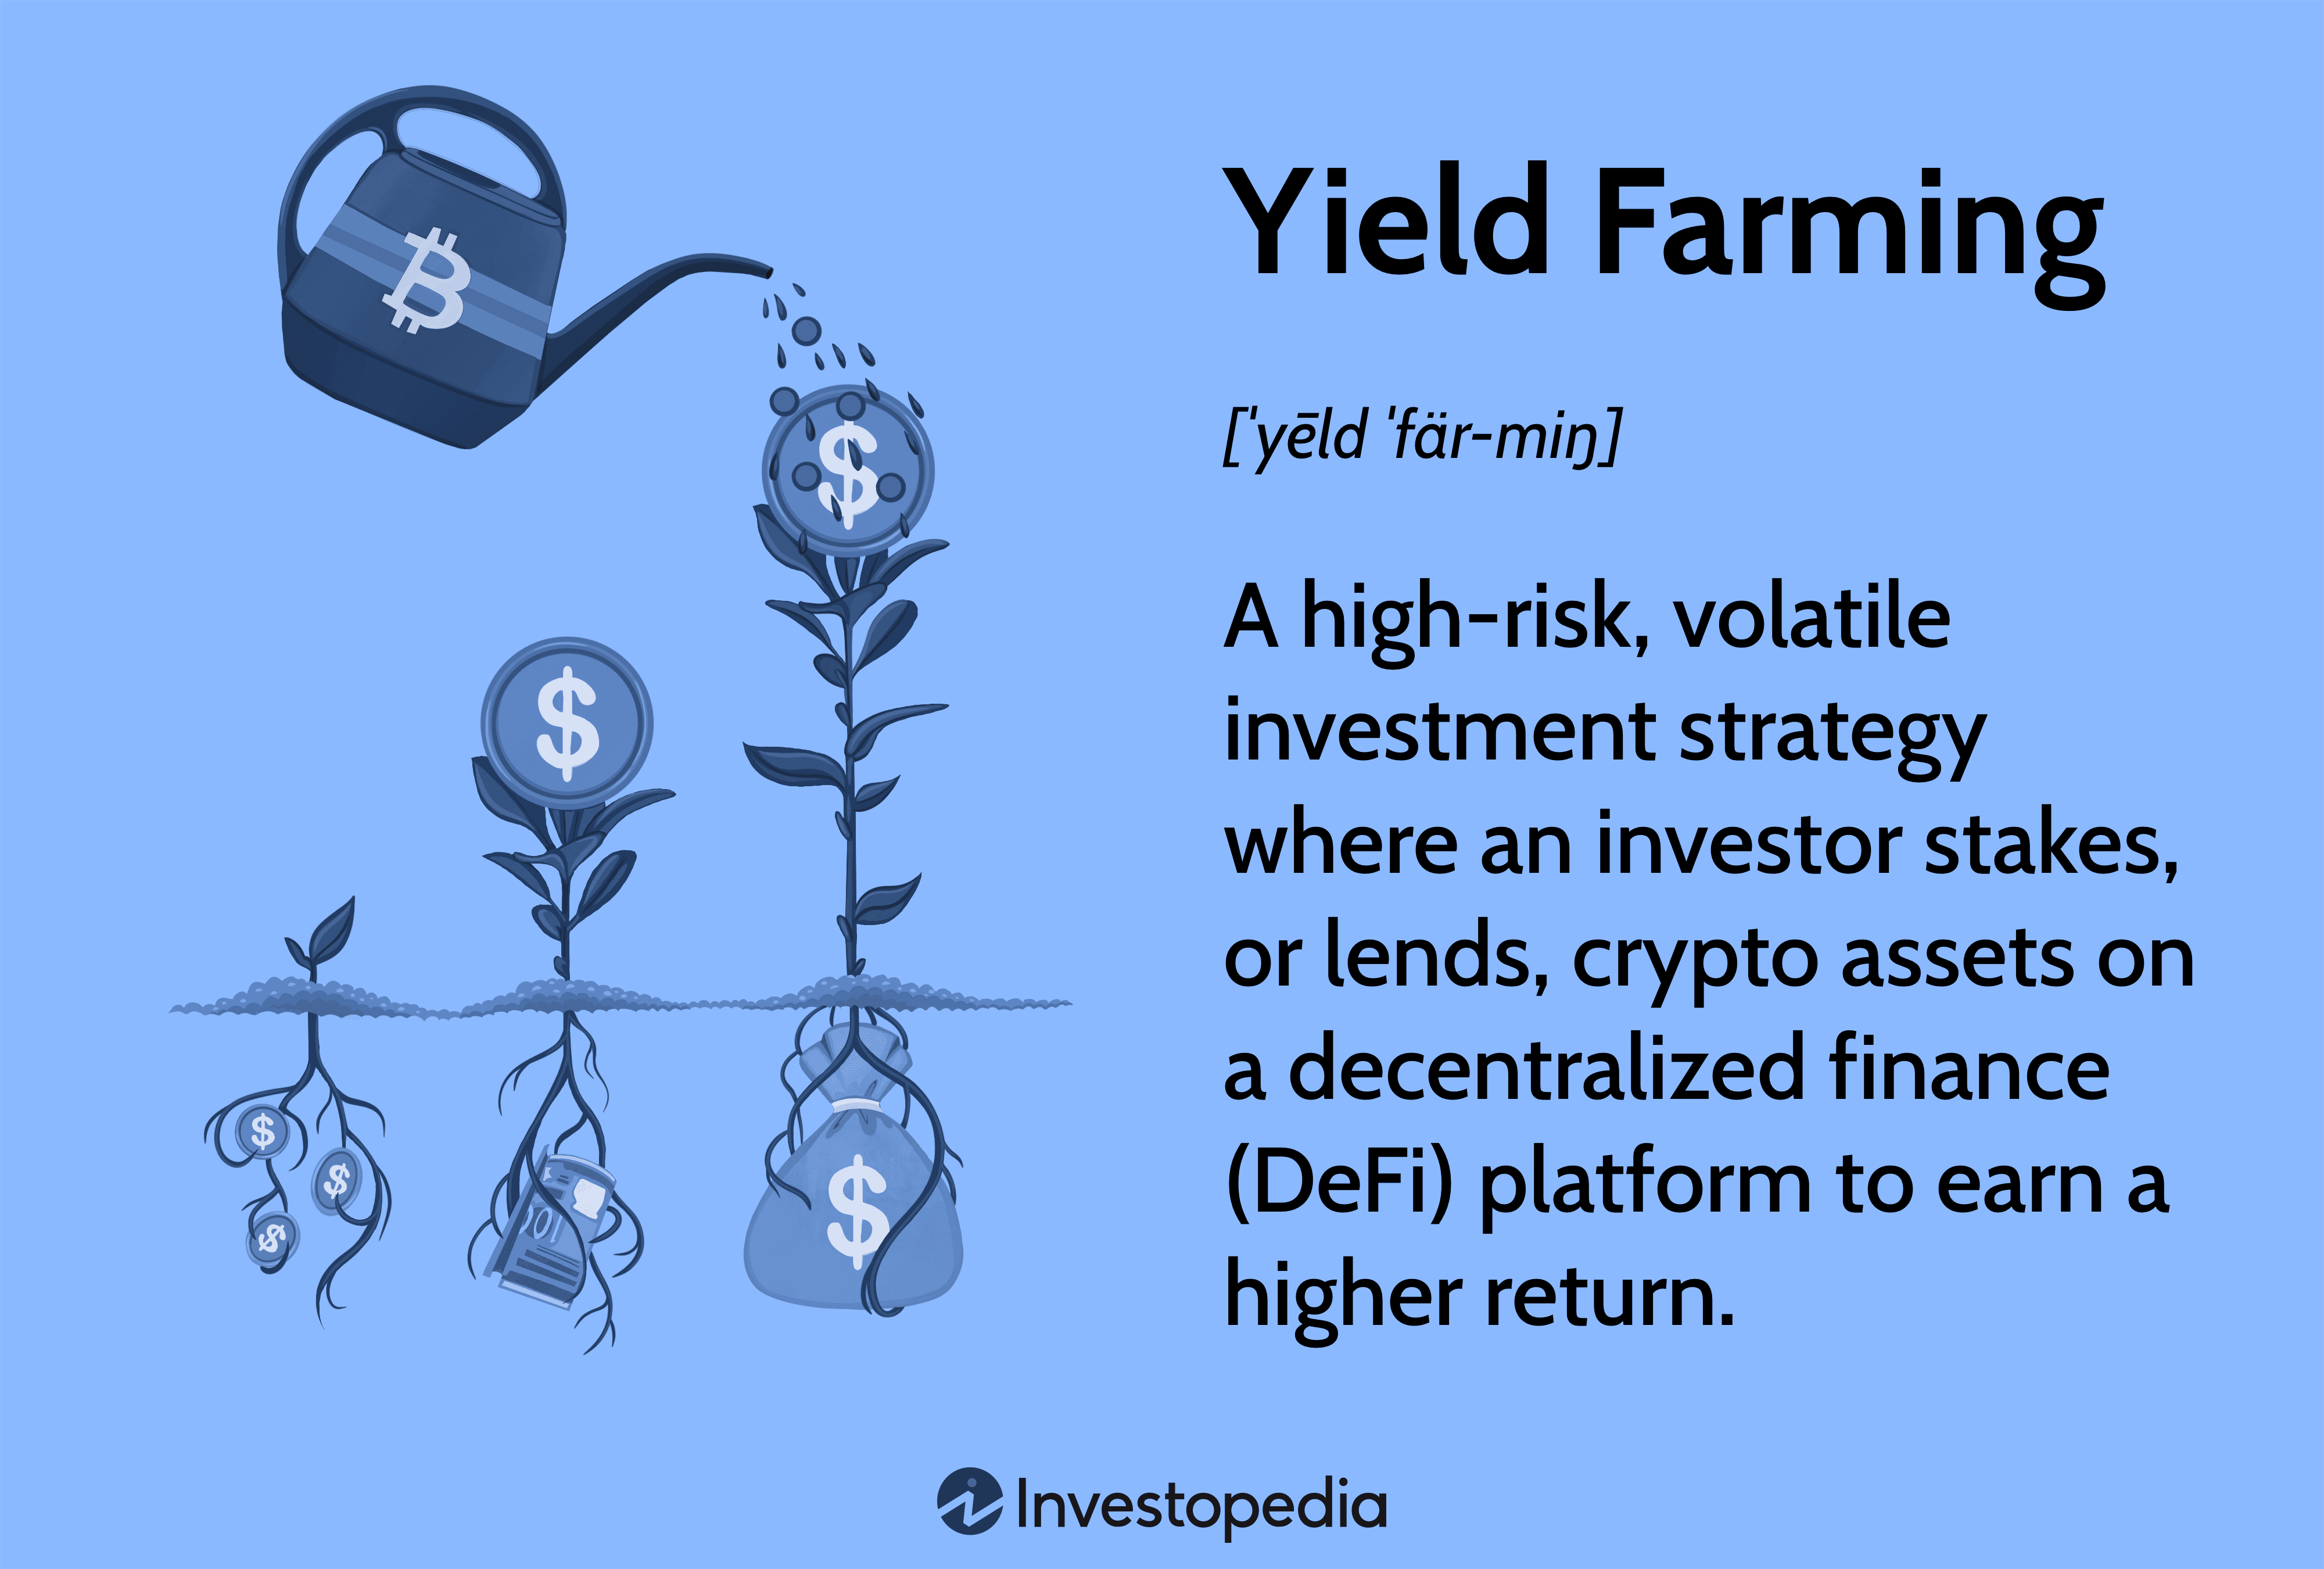 Yield Farming: A high-risk, volatile investment strategy where an investor stakes, or lends, crypto assets on a decentralized finance (DeFi) platform to earn a higher return.